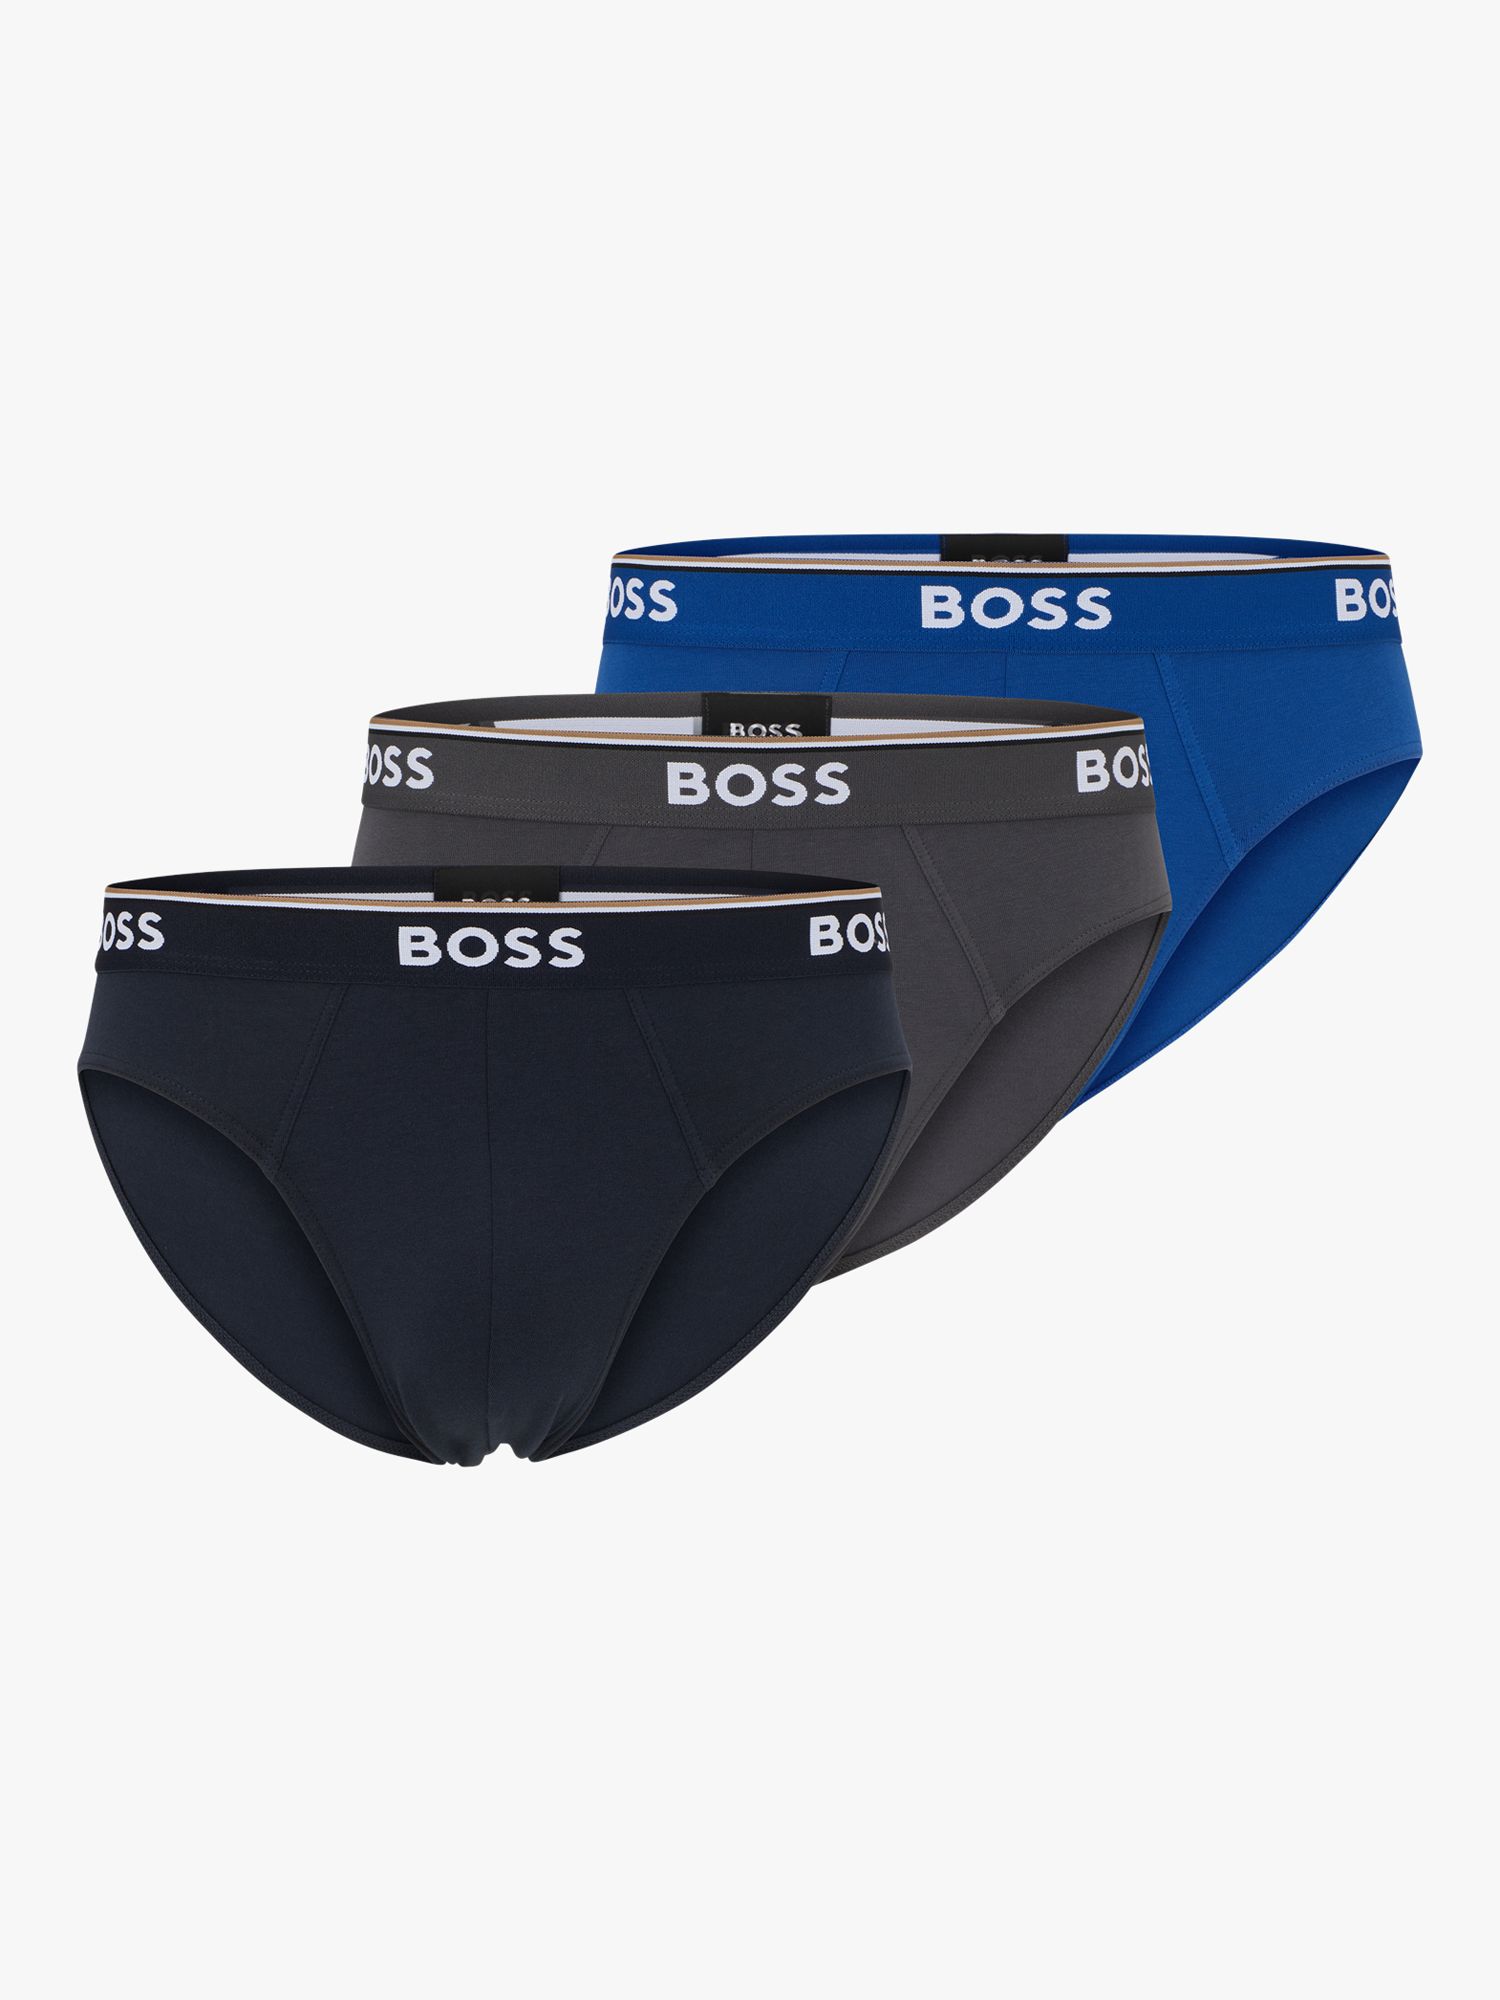 BOSS Stretch Stretch Power Briefs, Pack of 3, Multi at John Lewis ...